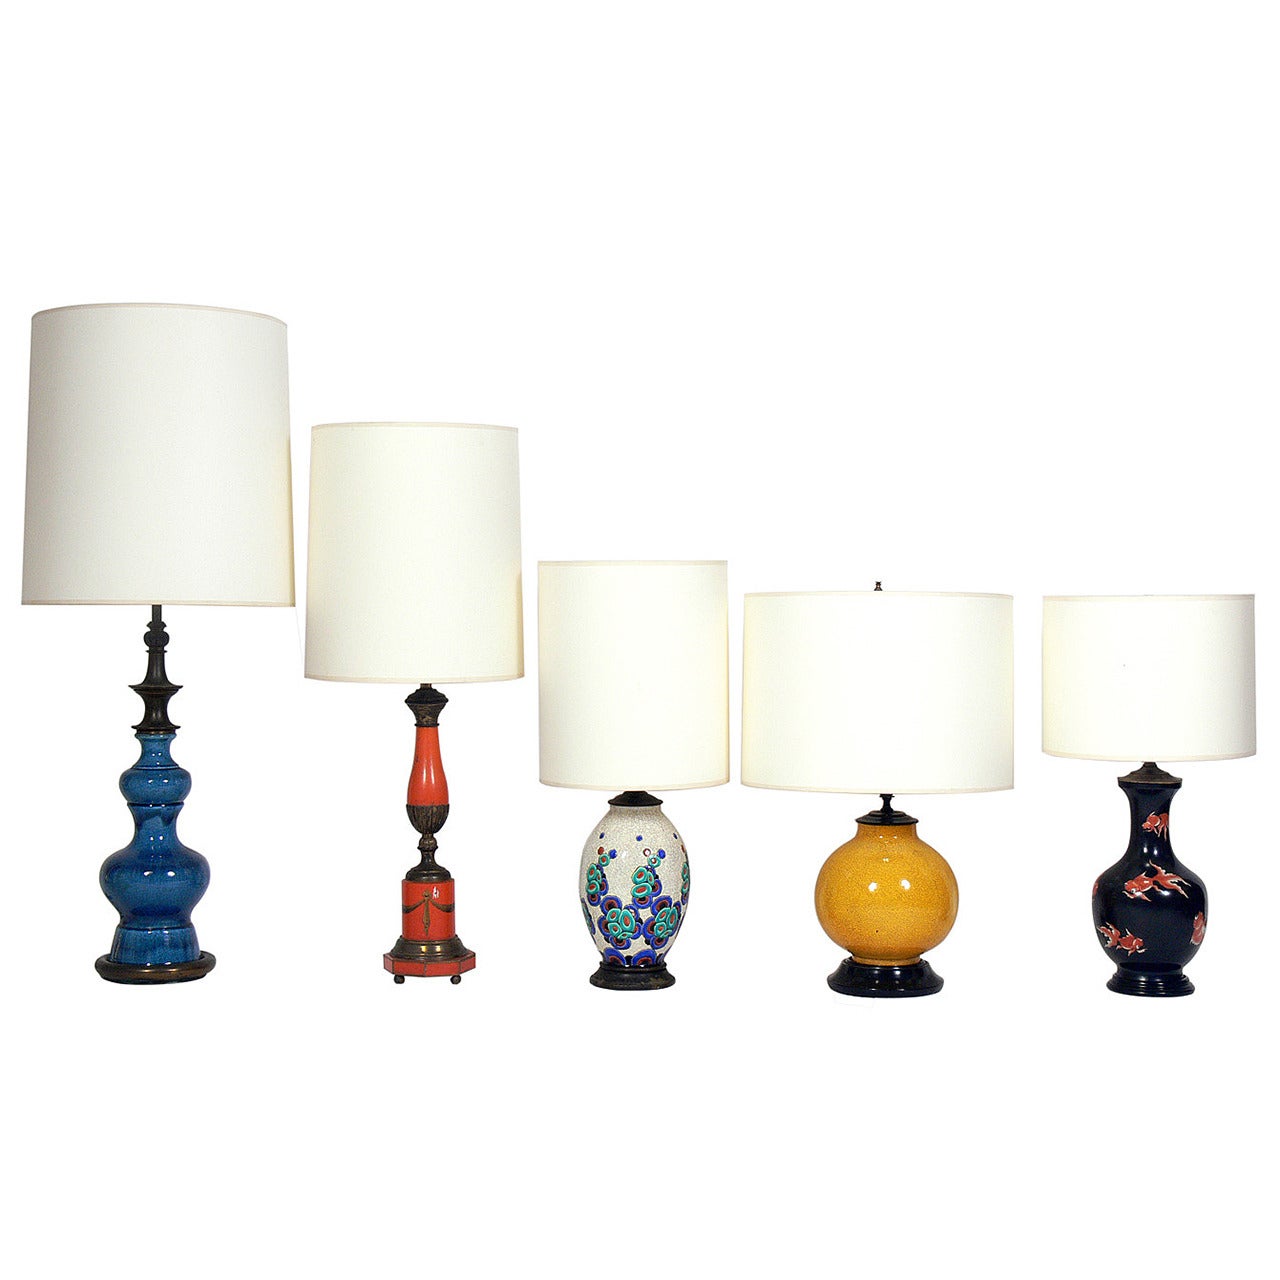 Selection of Colorful Lamps